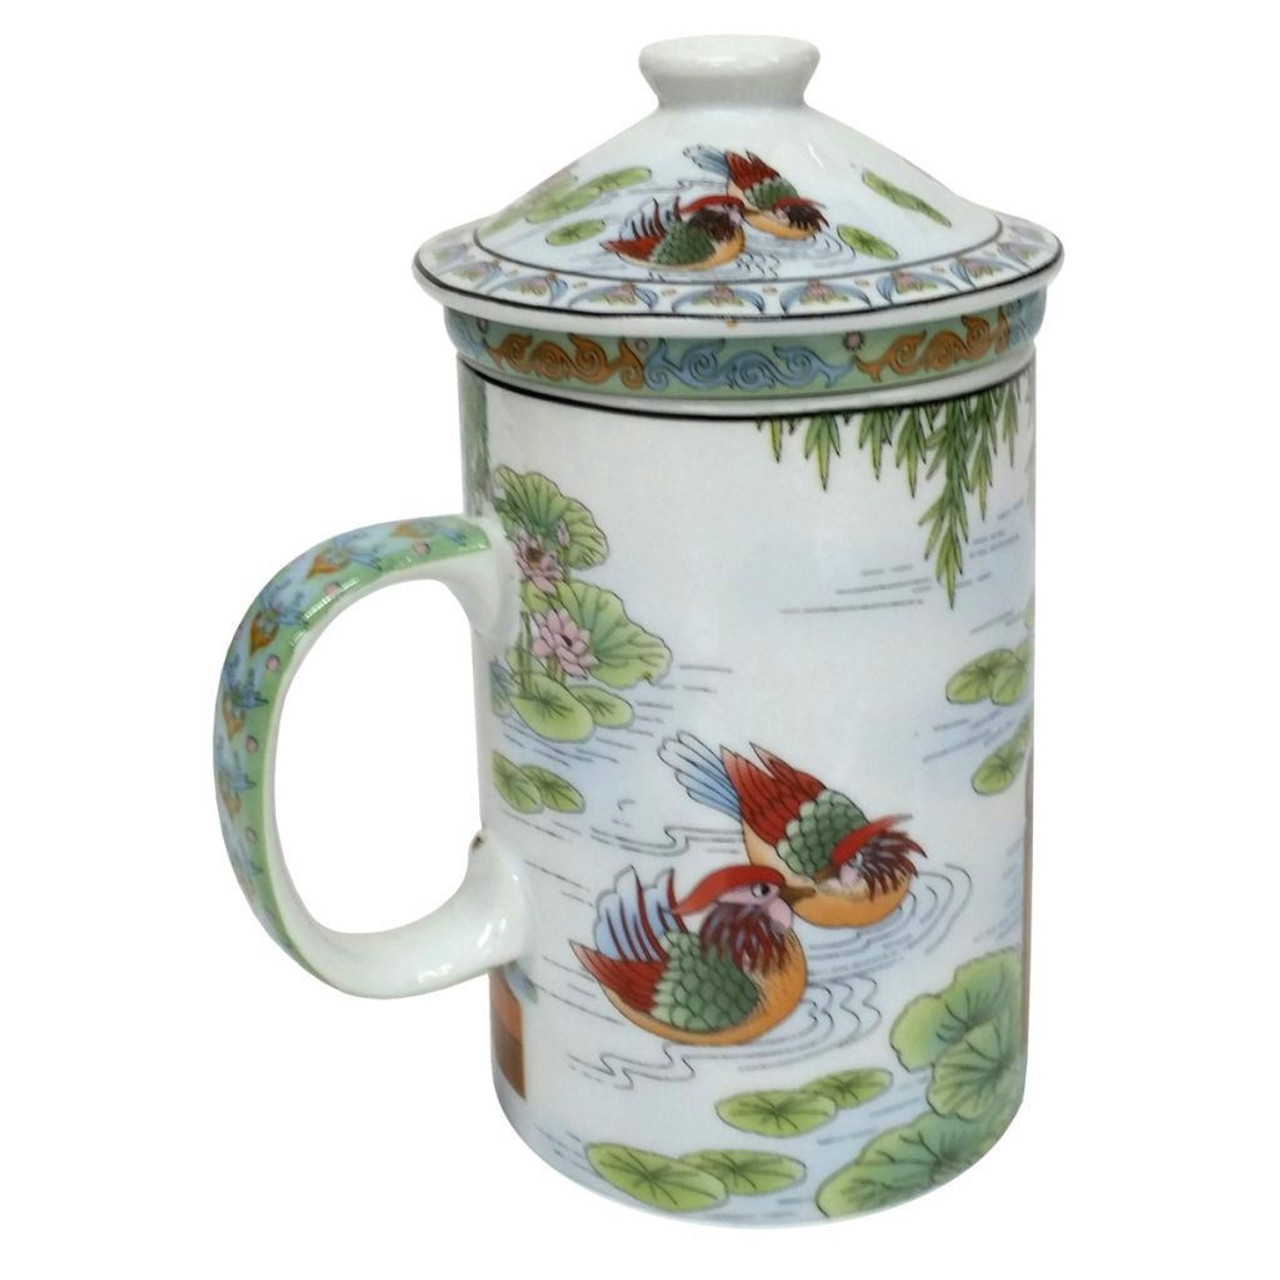 Porcelain Chinese Tea Mug with Infuser and Lid - Ladies in Garden - SECOND Pattern